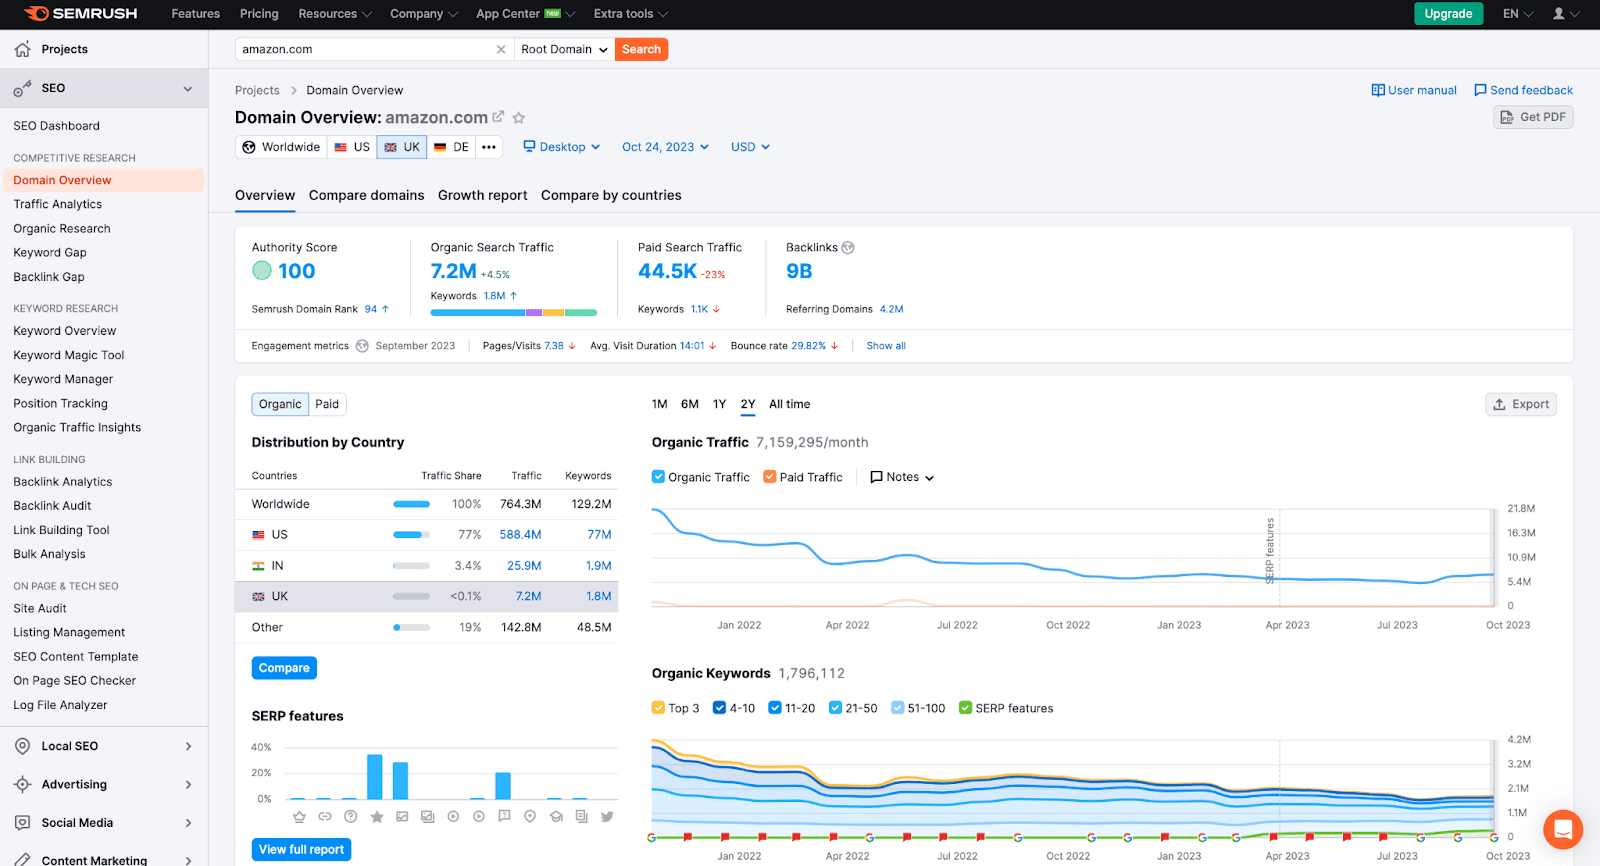 Semrush's Competitor Research Tool